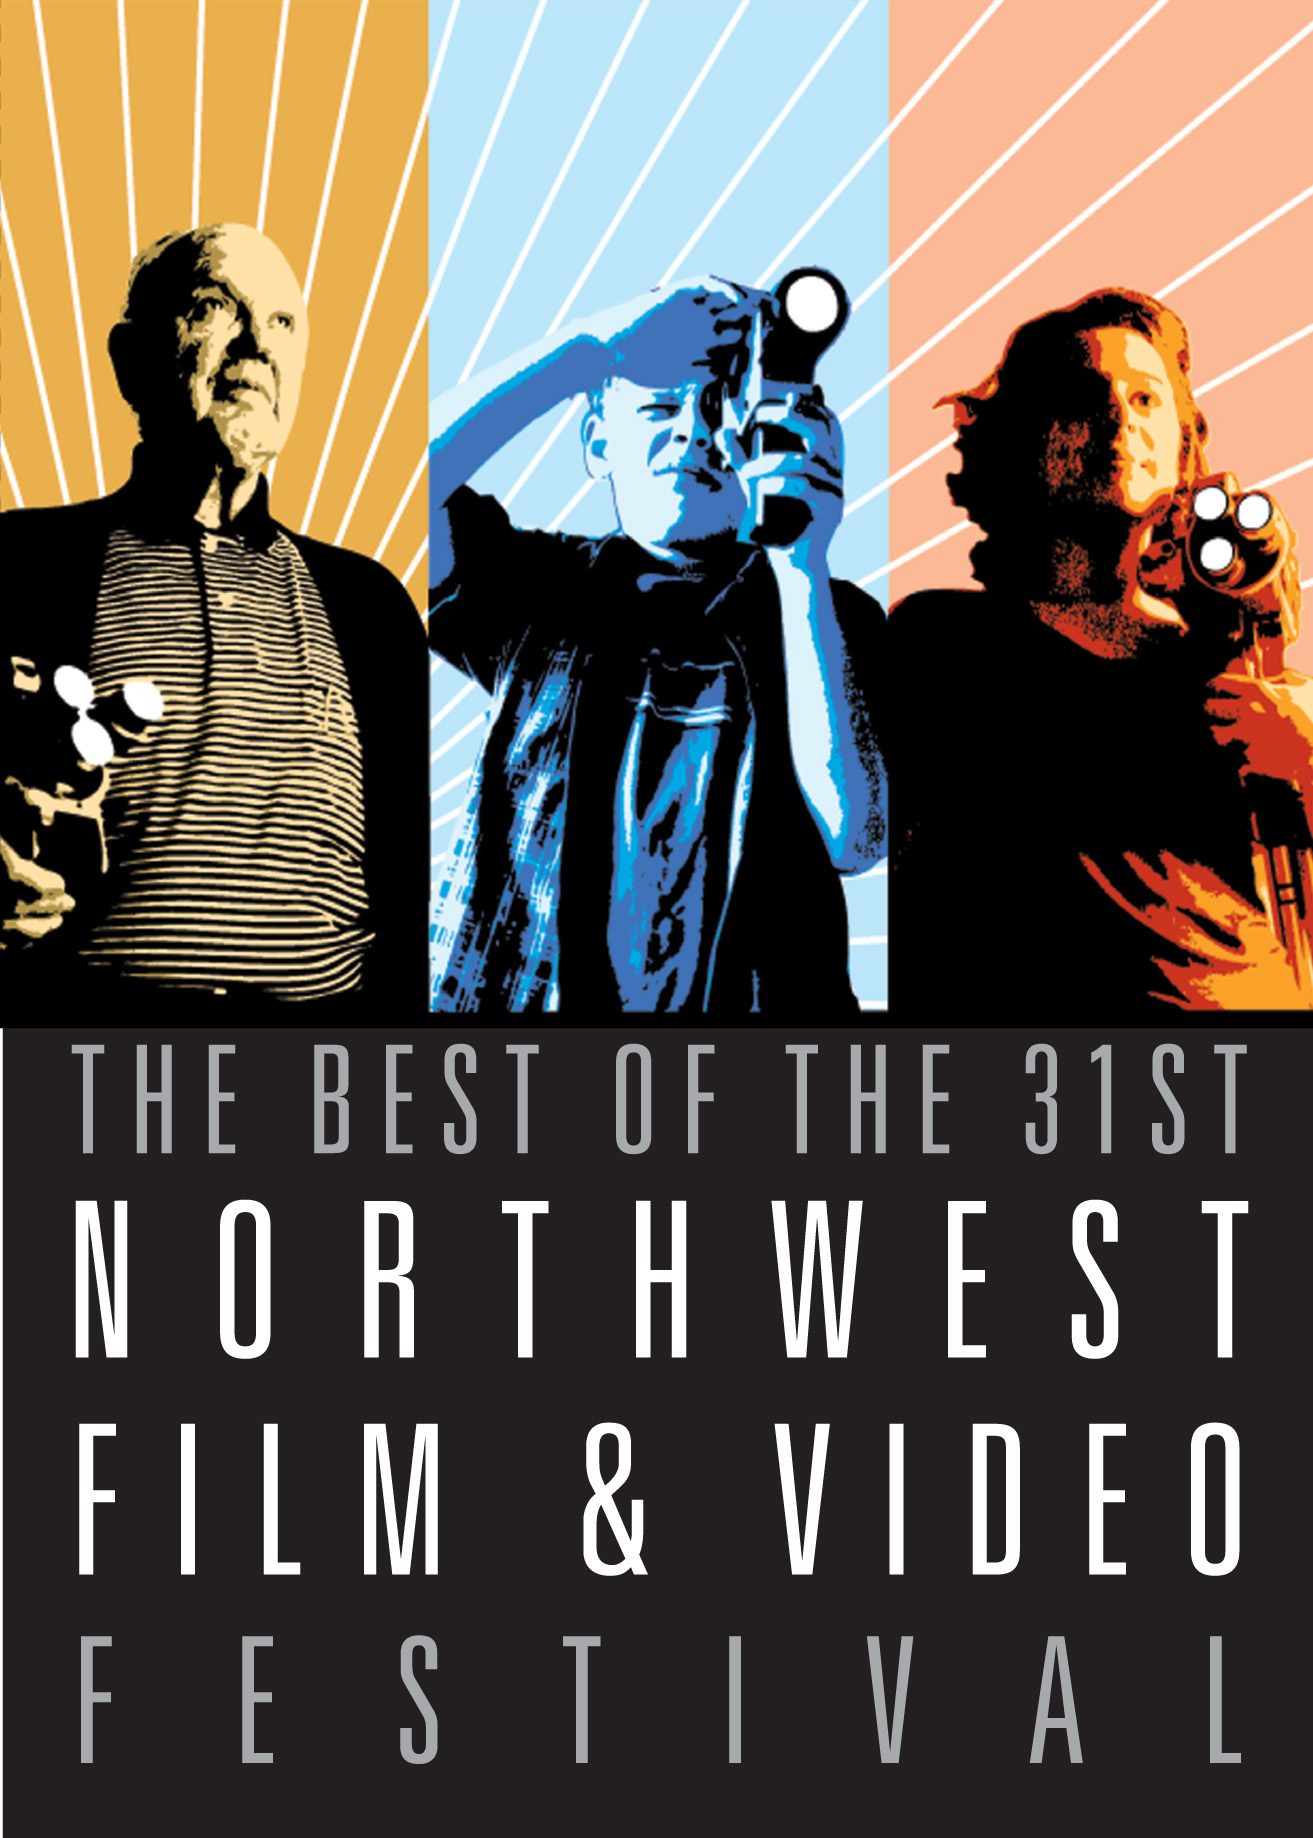 Cover of the DVD